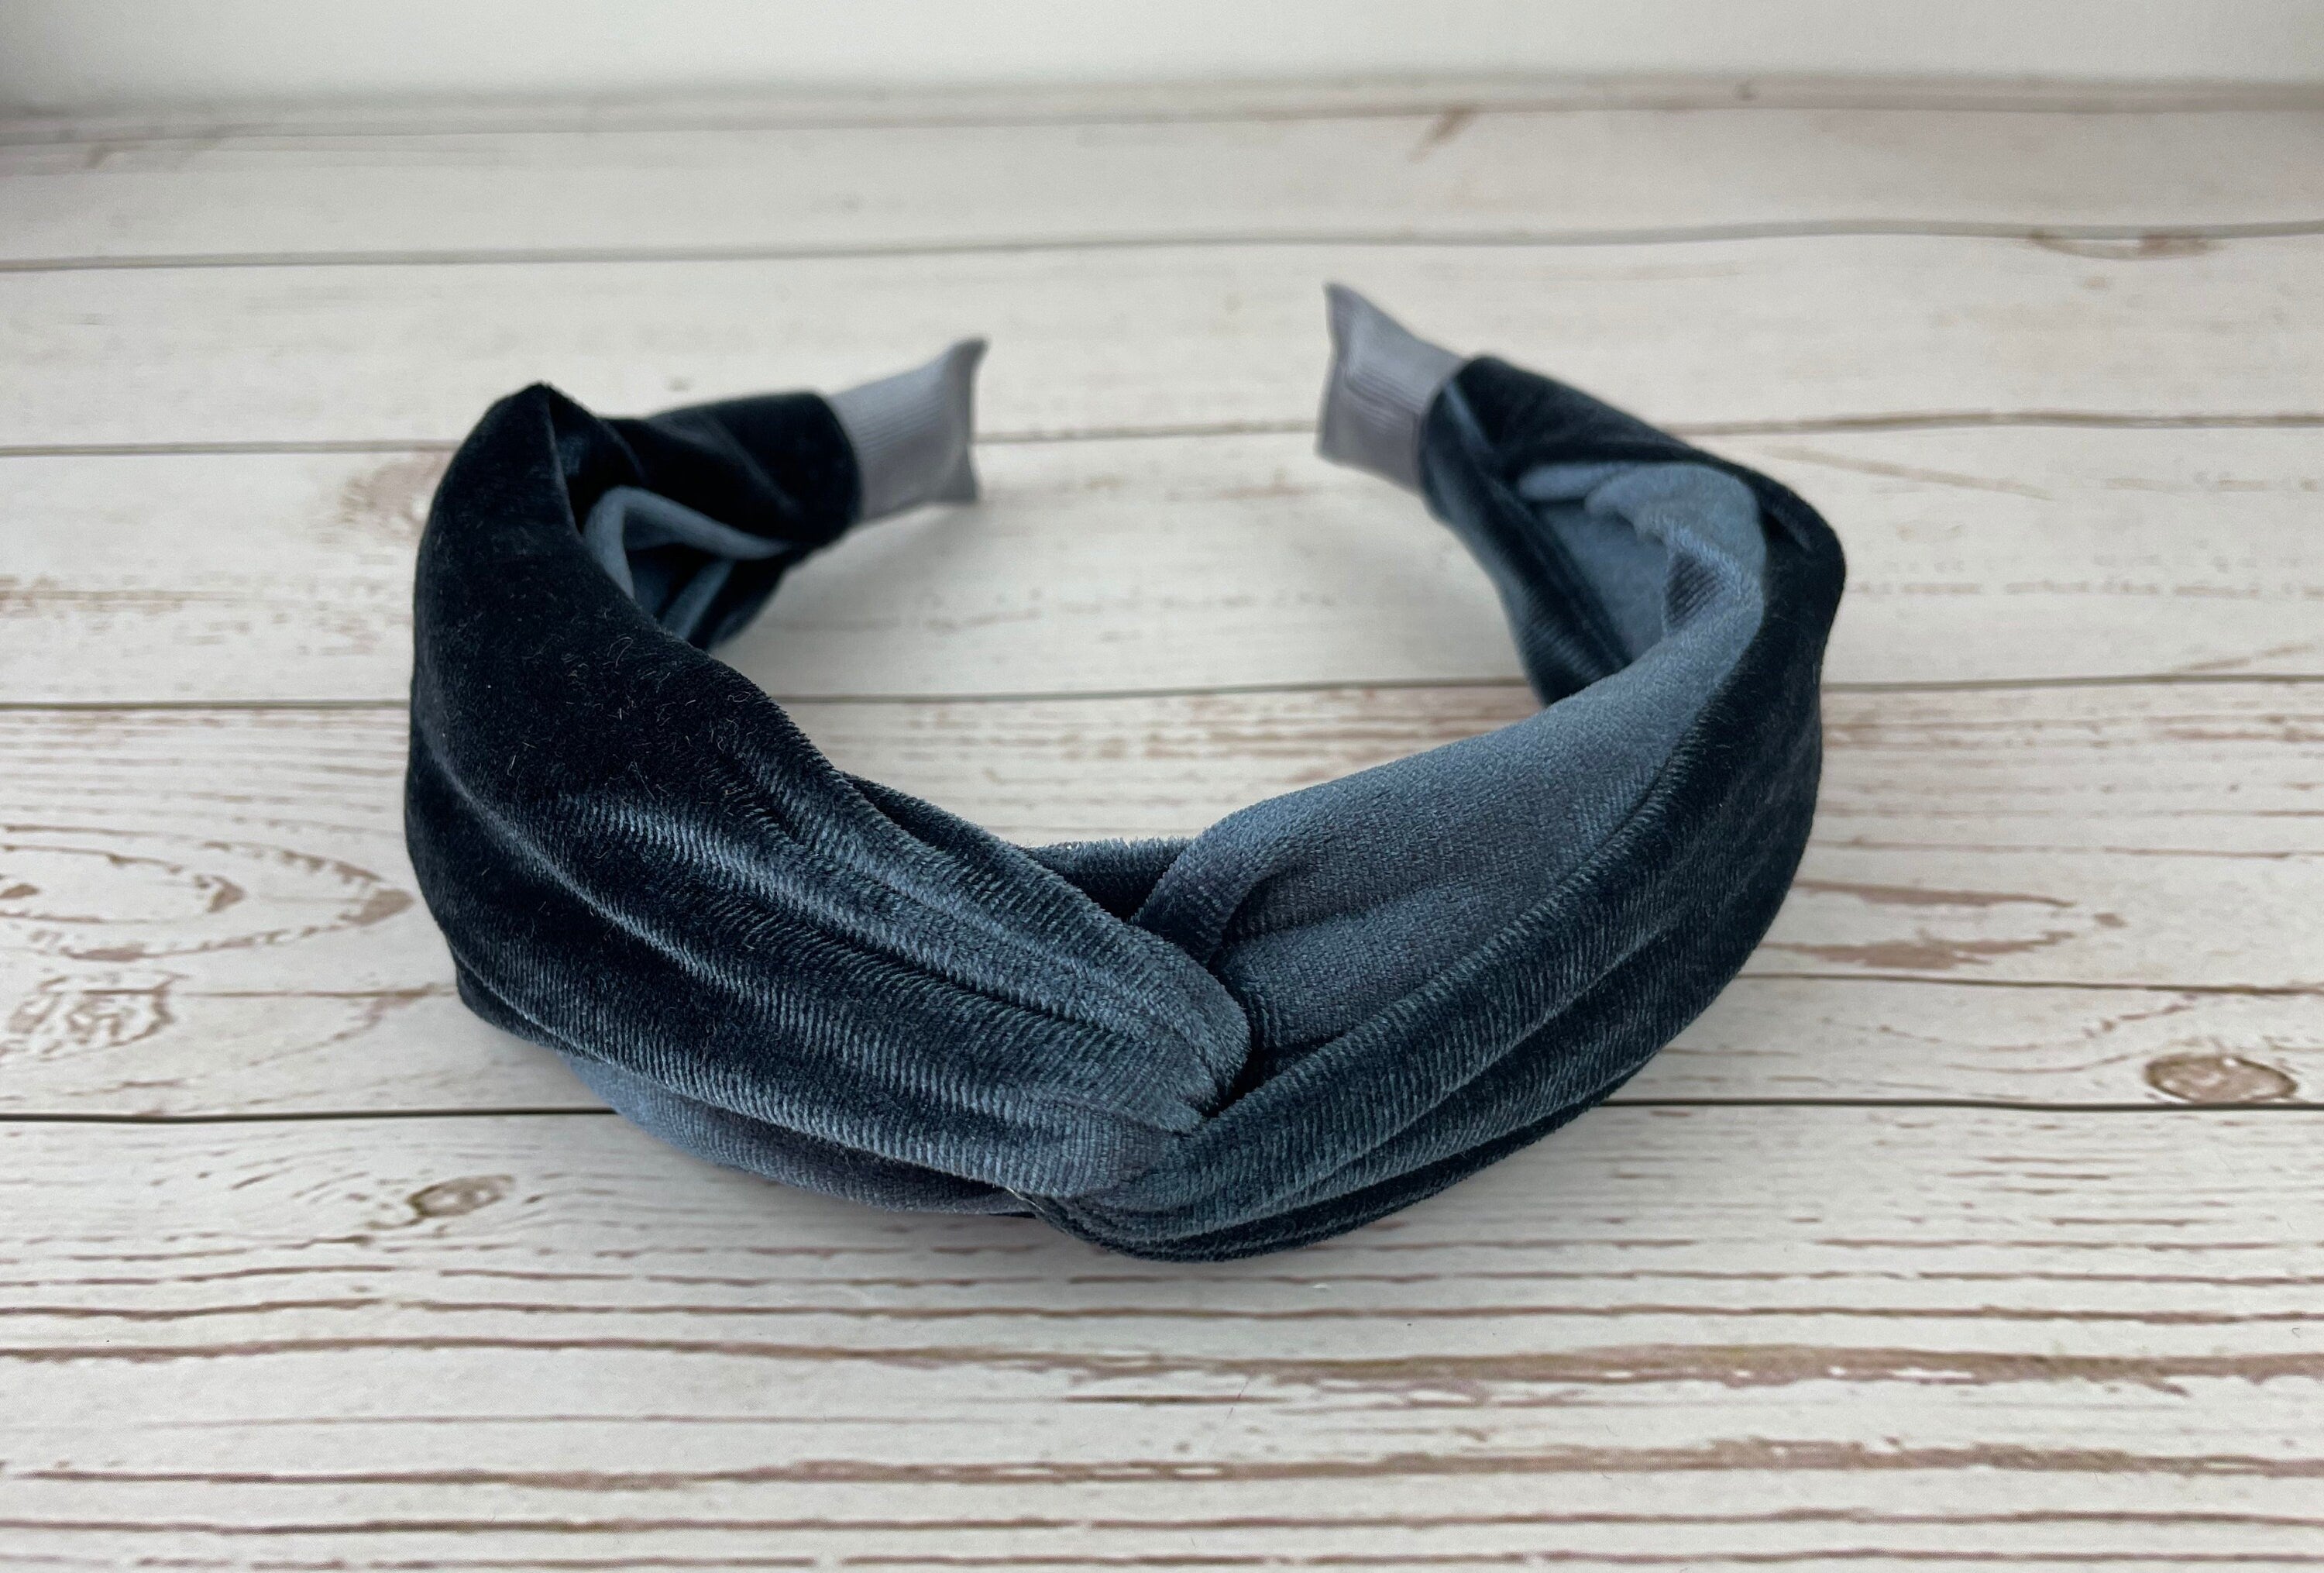 Make a fashion statement with our Knotted Headband in Light Blue Velvet! The stylish knot adds an extra touch of charm to this classic headband. Perfect for women who want to add a little extra oomph to their outfits!